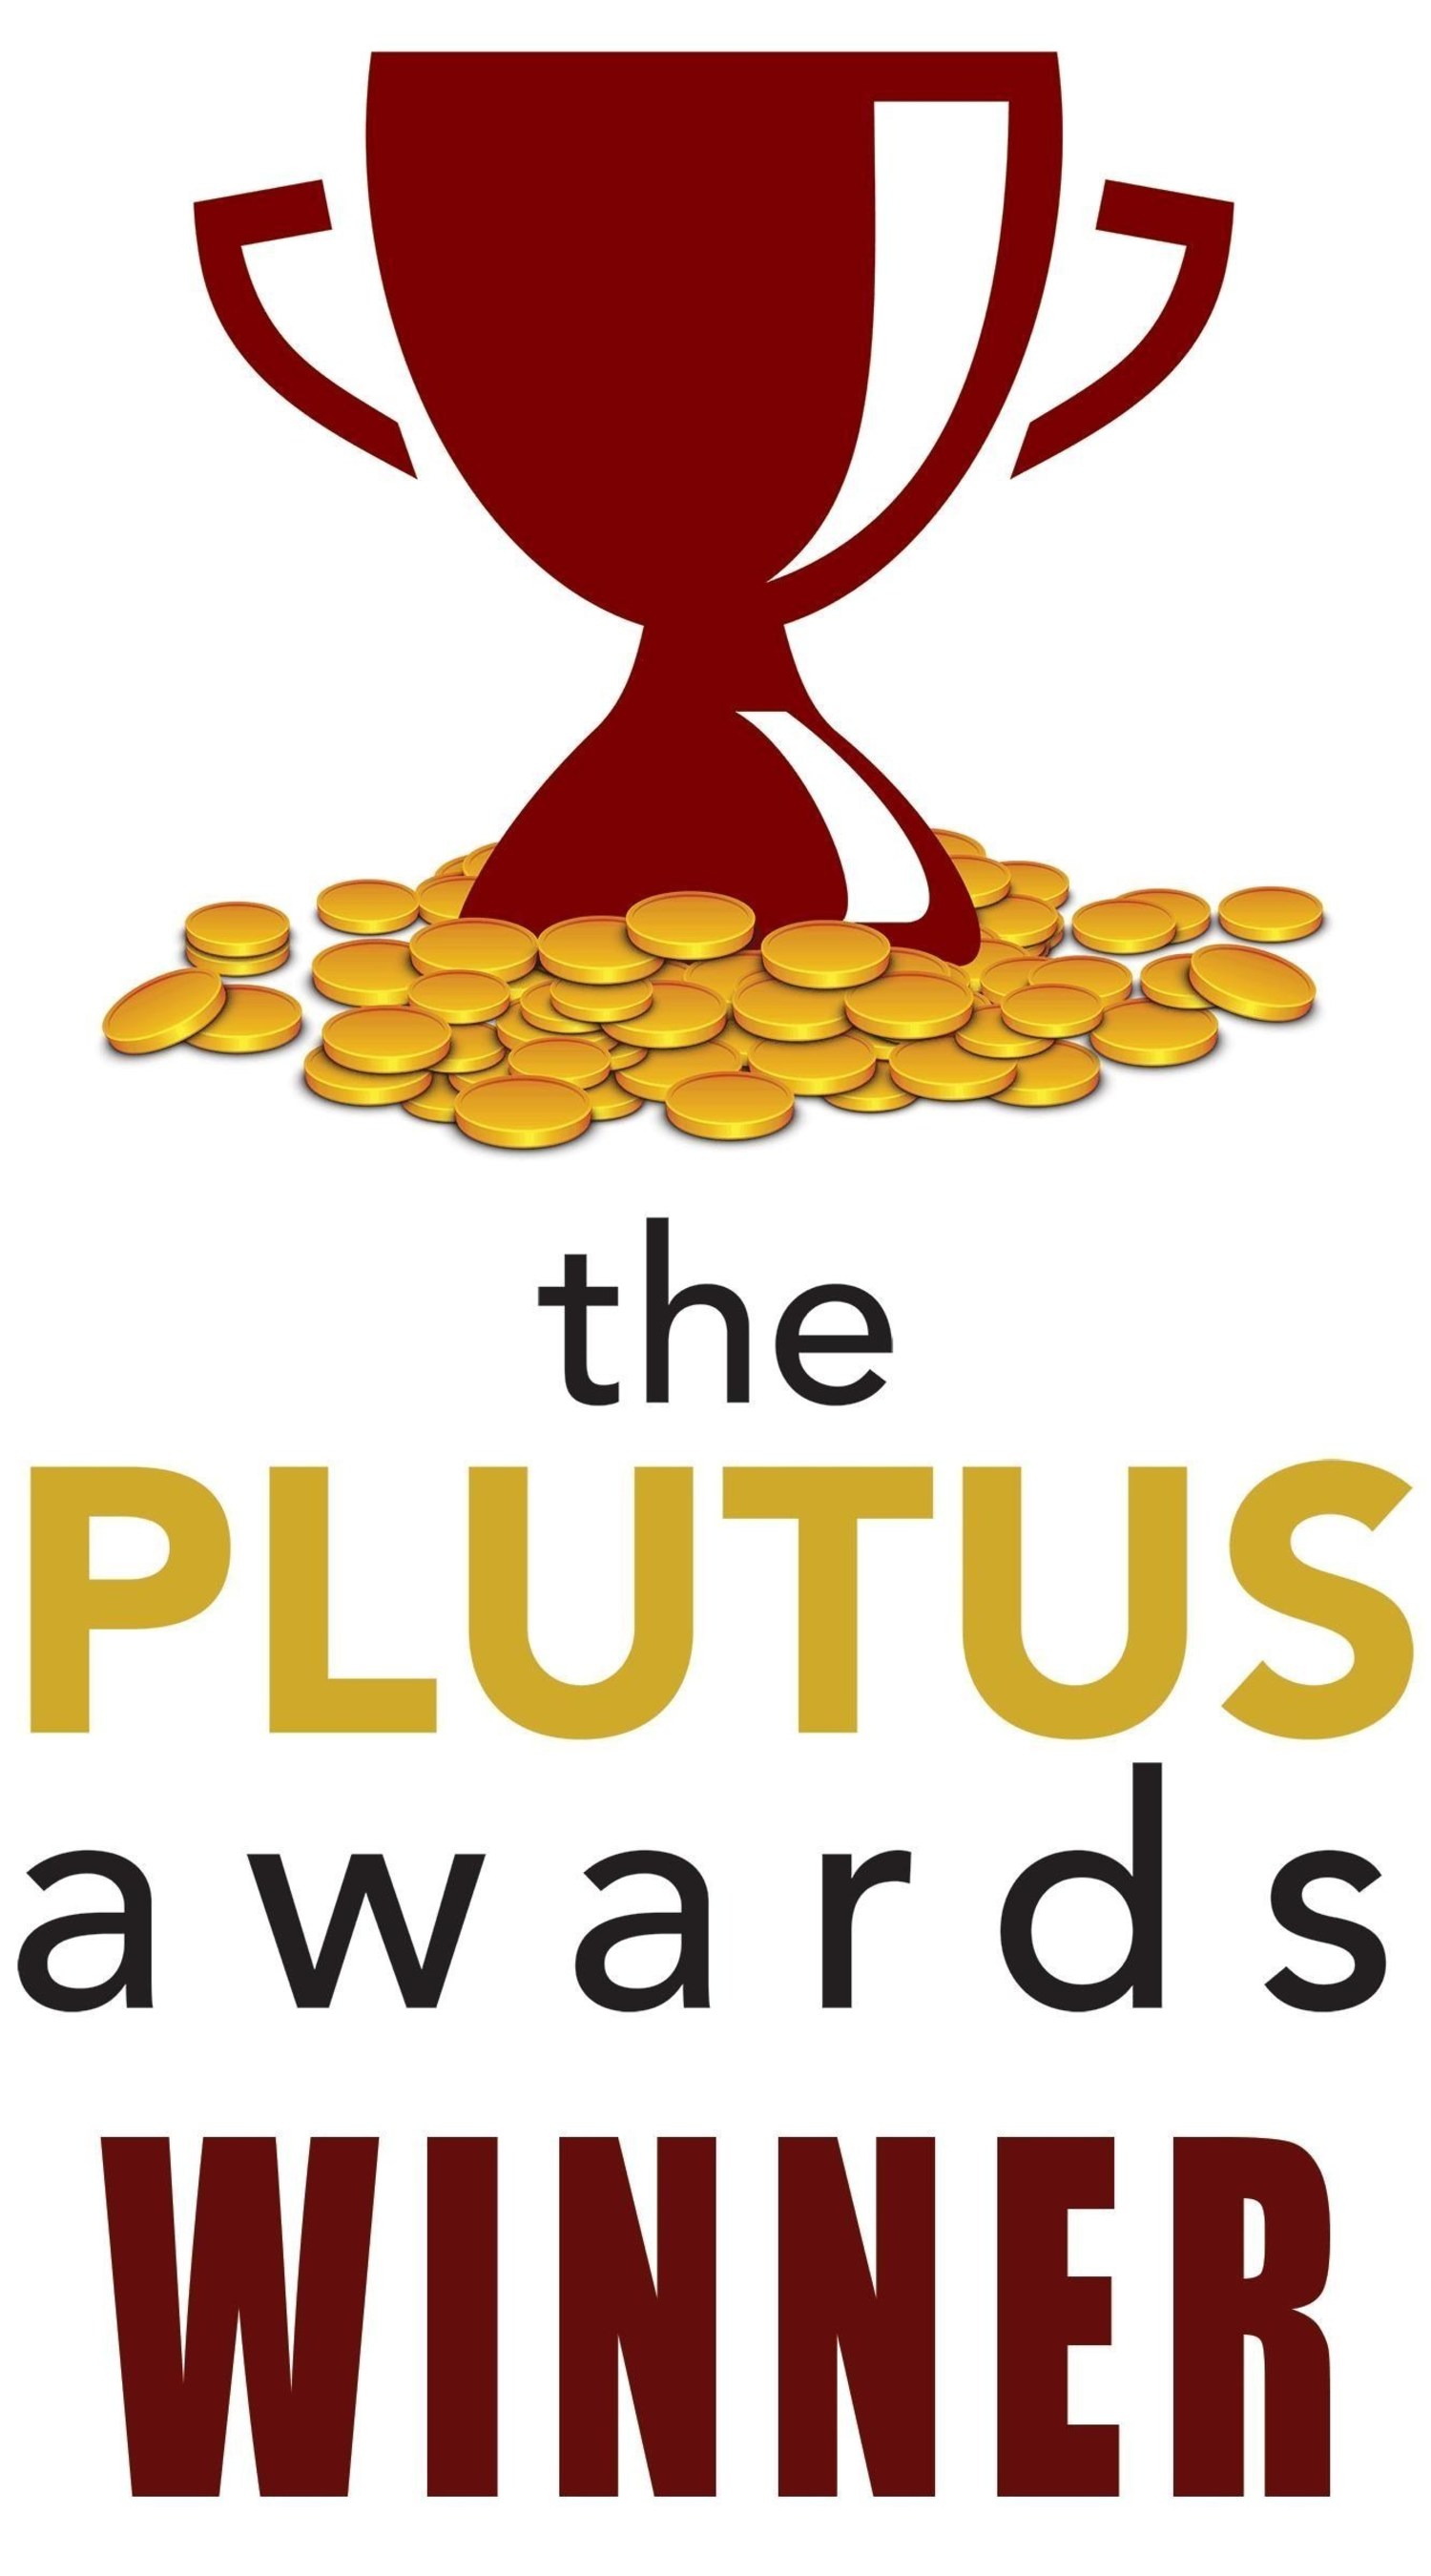 Experian wins back-to-back Plutus Awards for Best Use of Social Media by a Brand